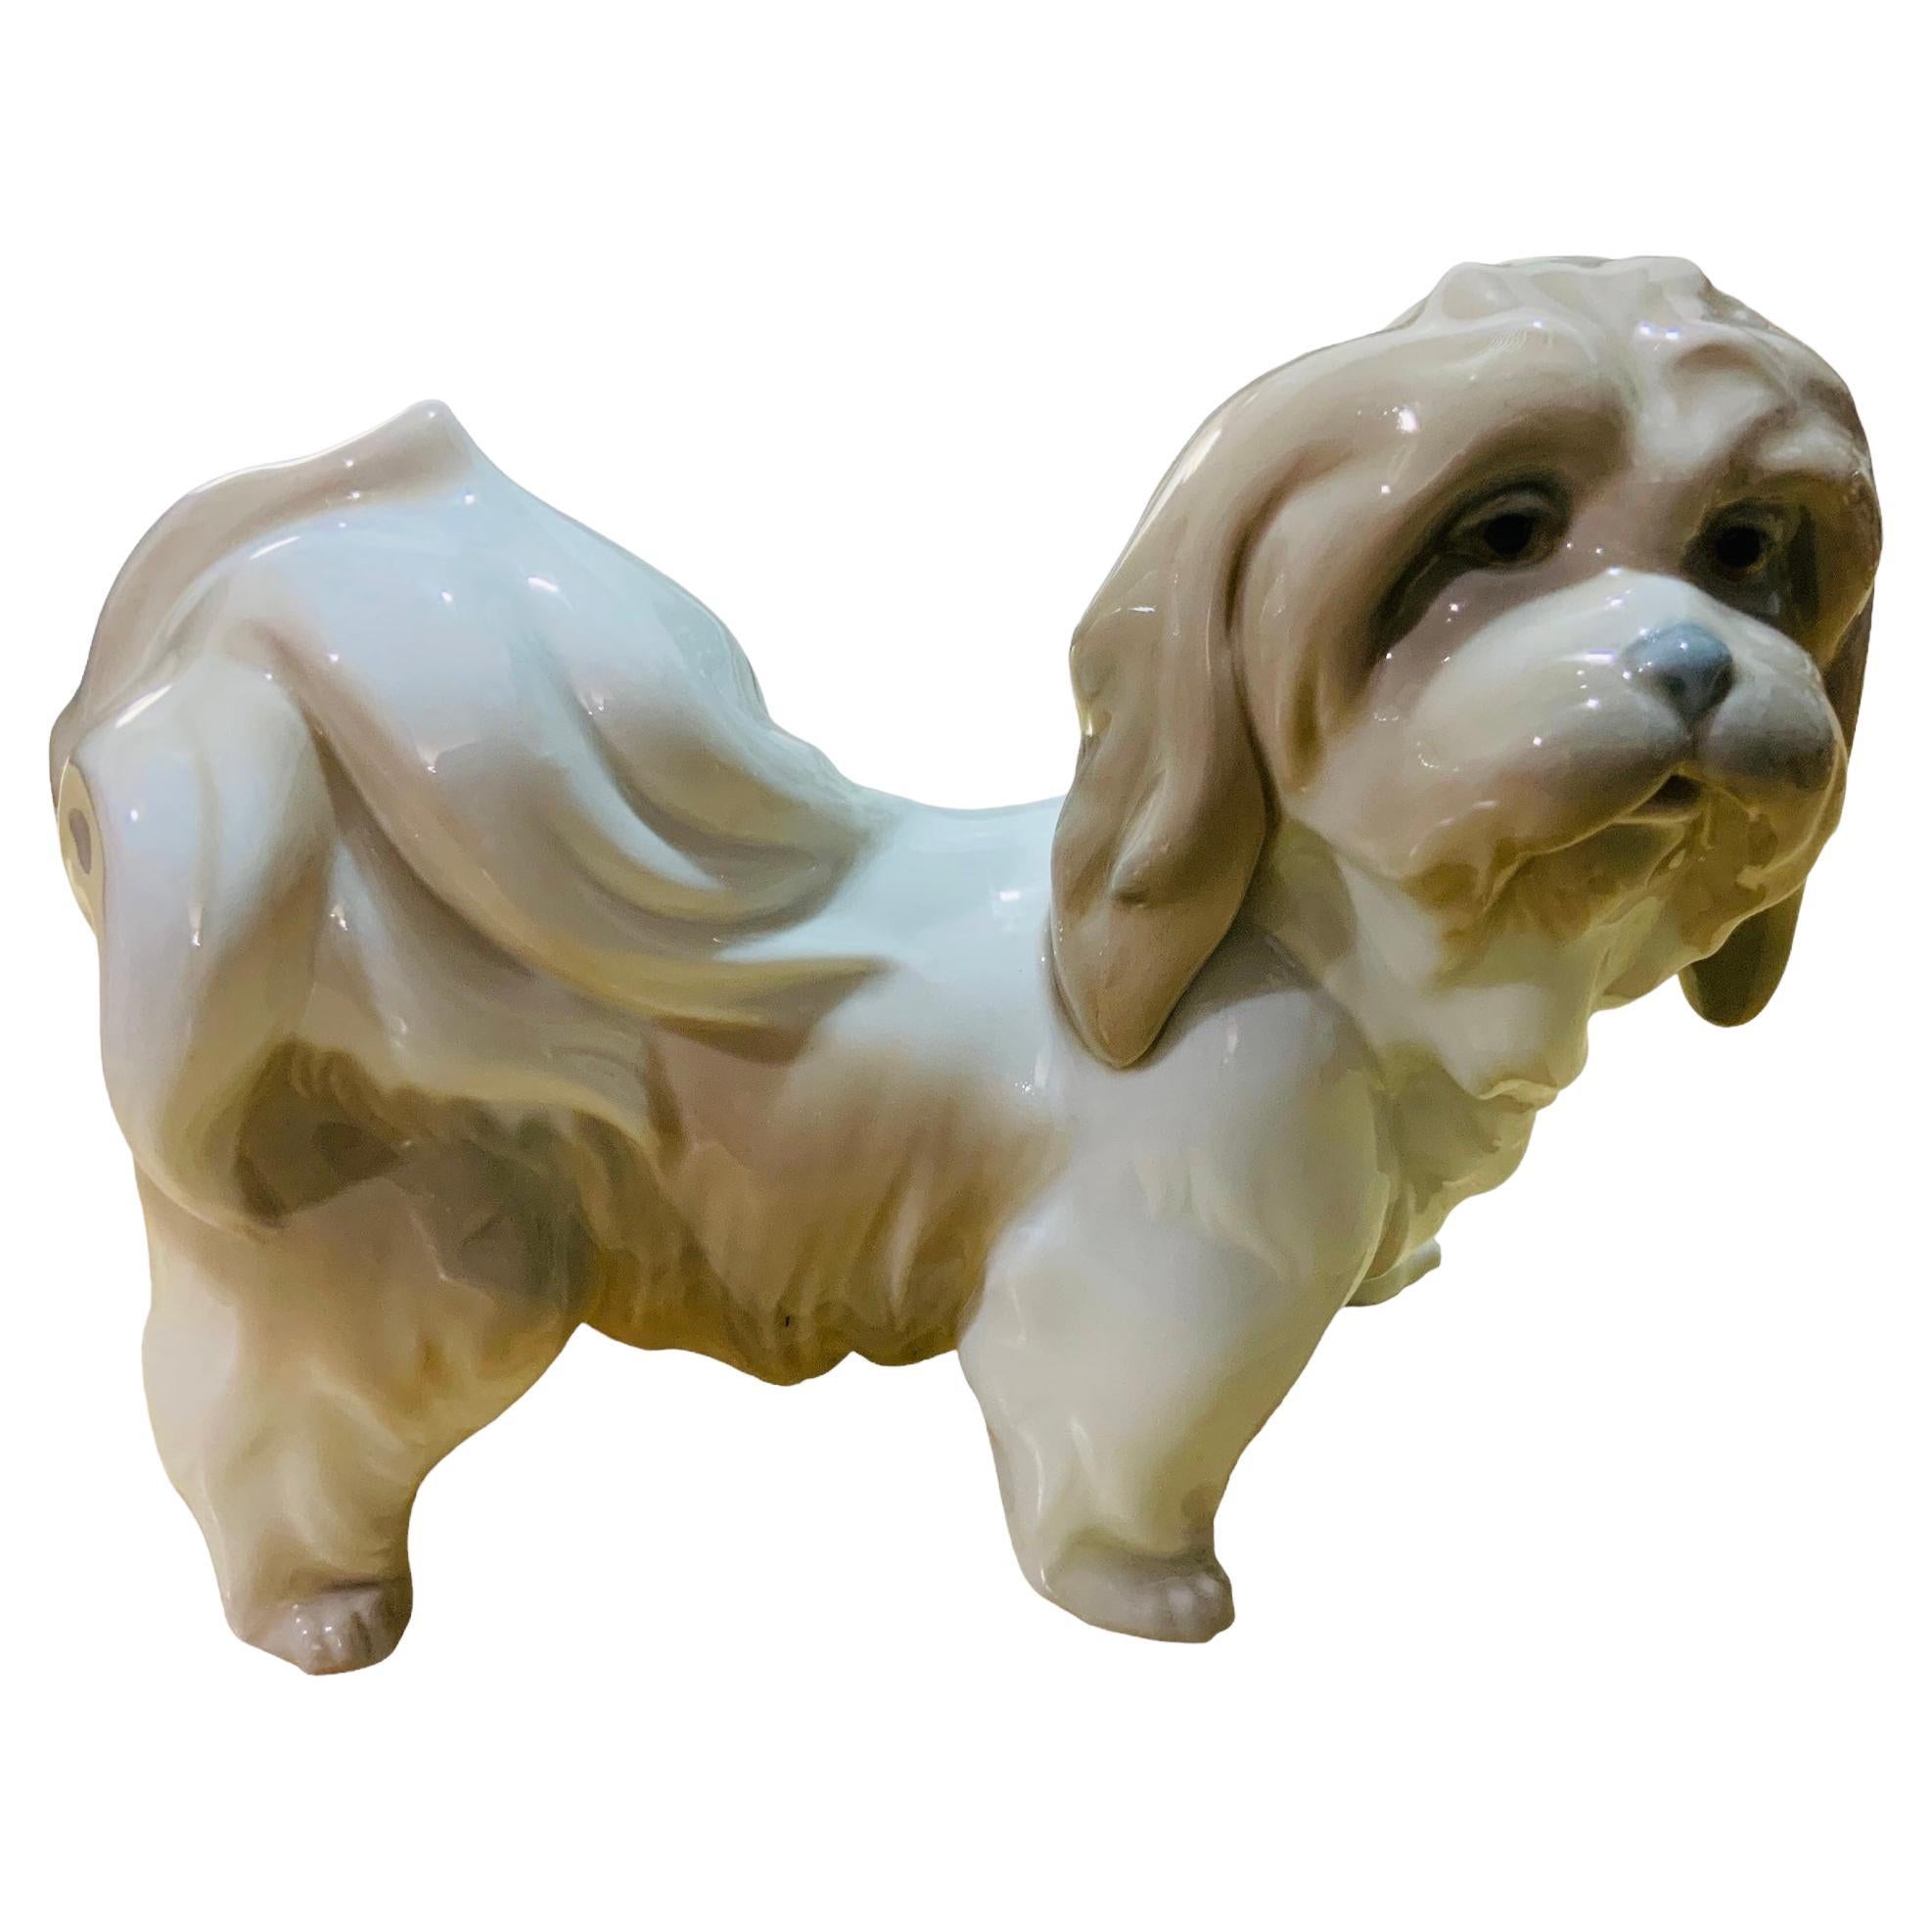 Lladro Porcelain Figurine Of A Lhasa Apso Dog For Sale